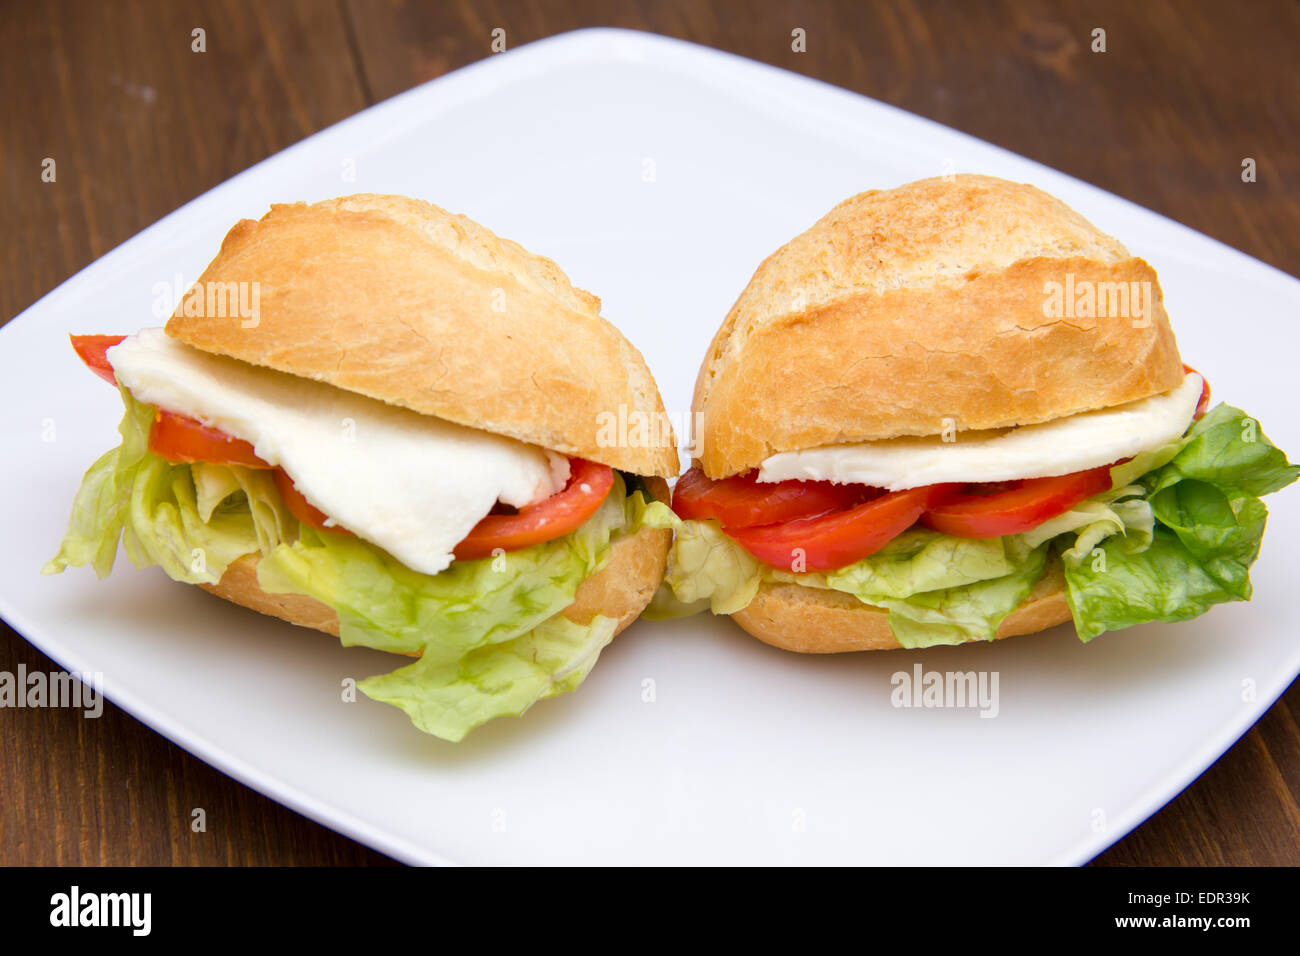 Sandwiches with tomato and cheese on plate over wooden table seen up close Stock Photo